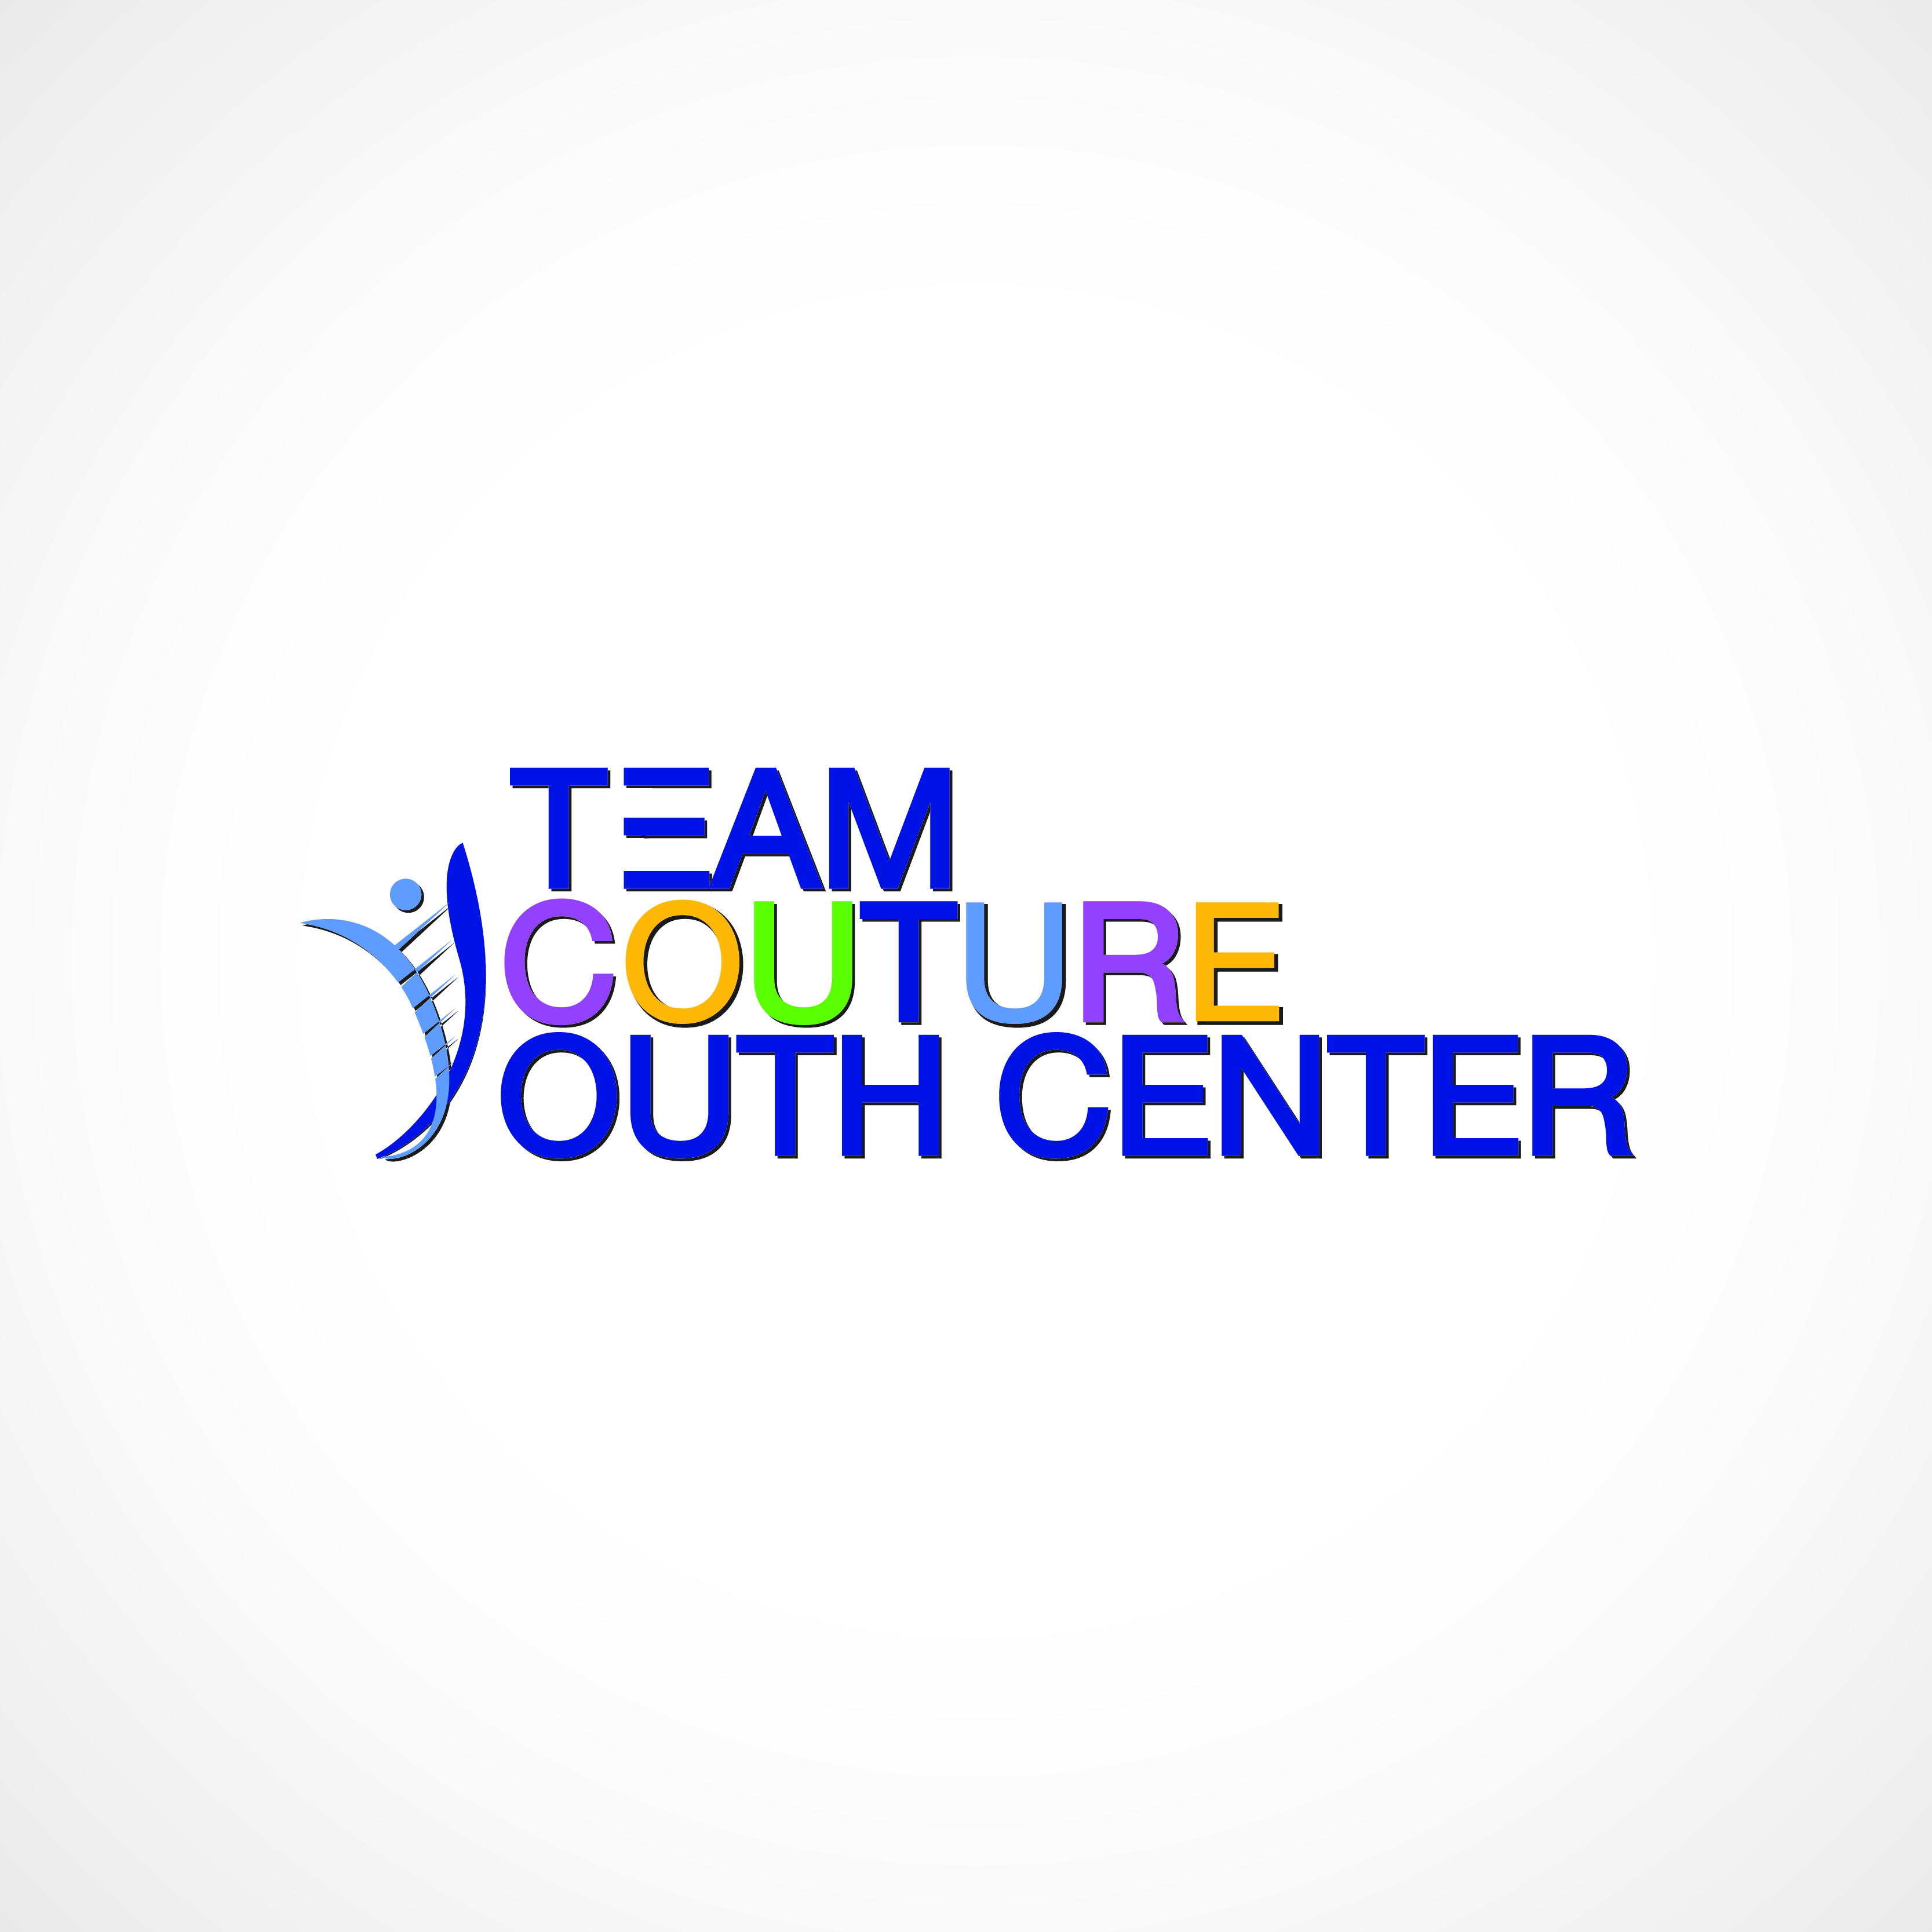 Team Couture Youth Center logo